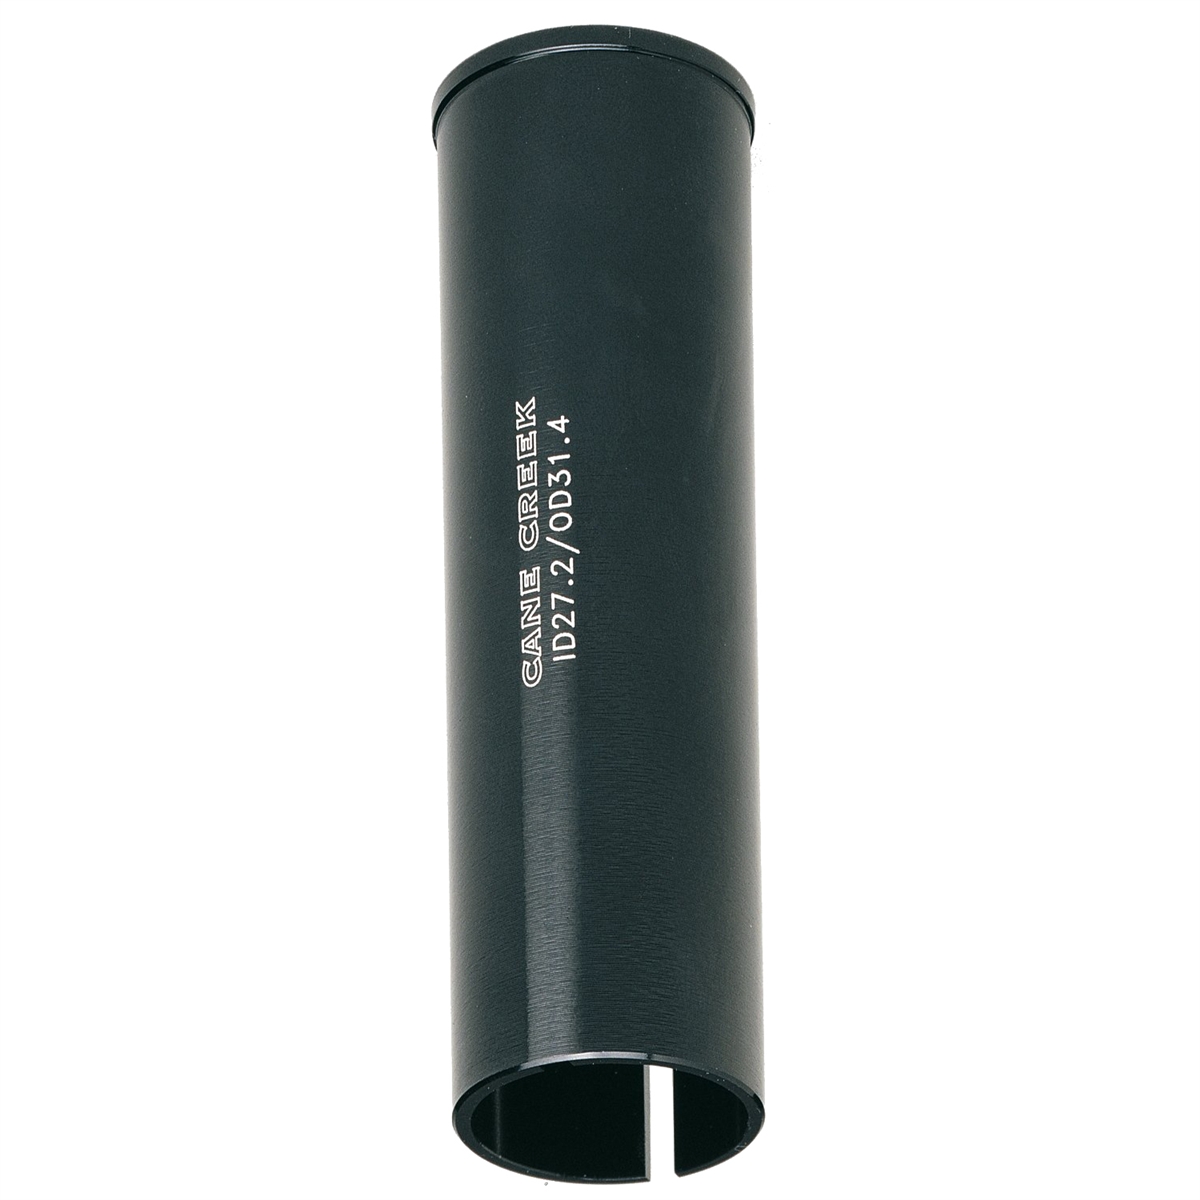 Seatpost adapter from 27.2mm to 30.4mm